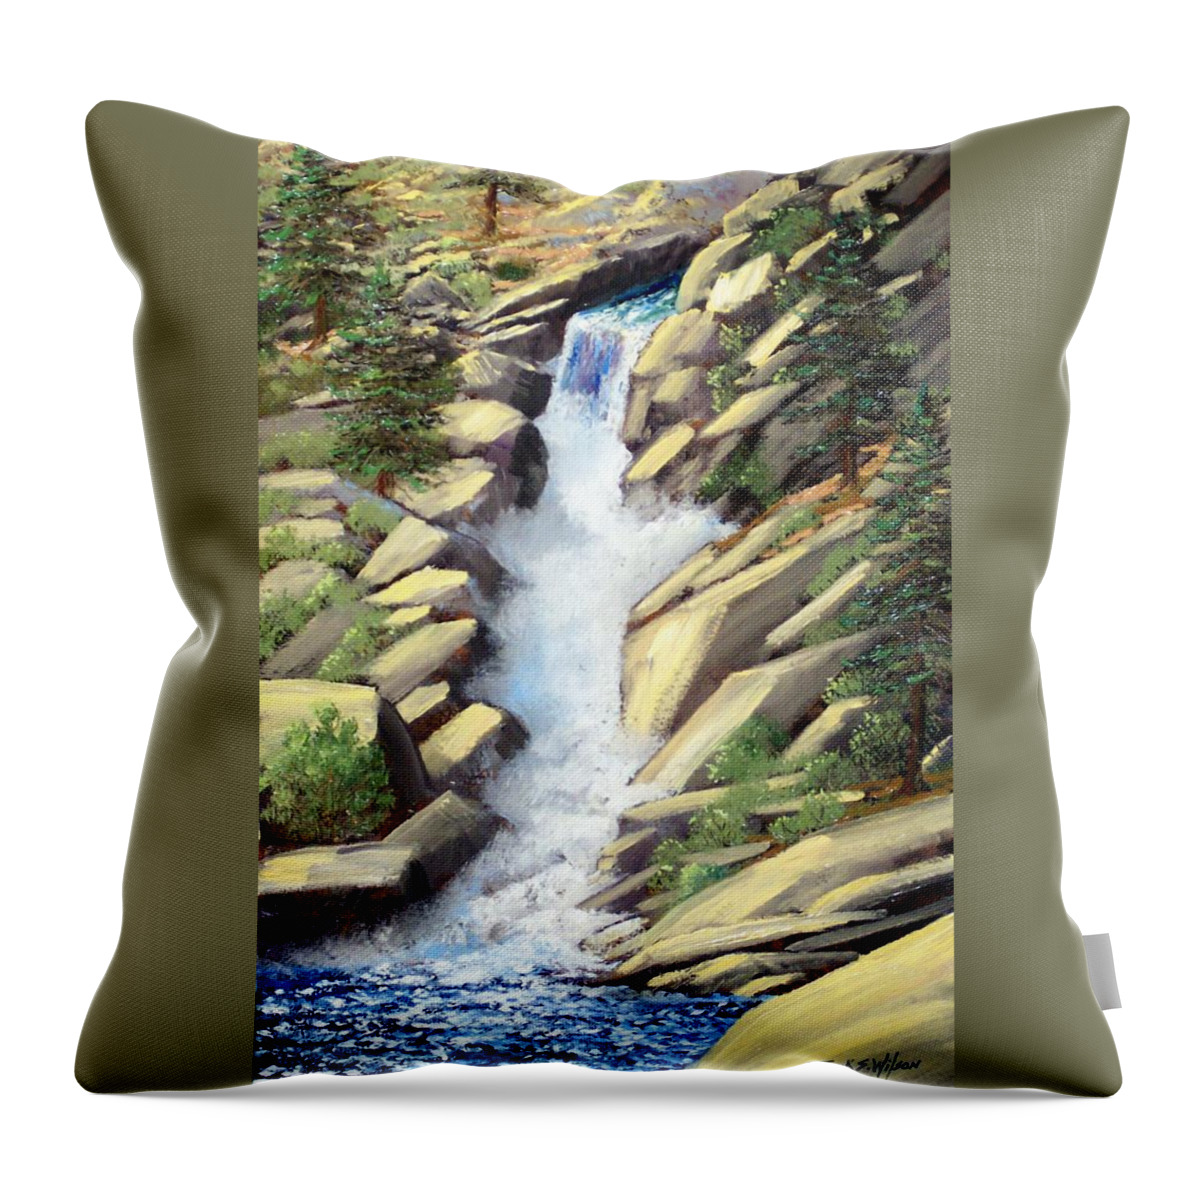 Landscape Throw Pillow featuring the painting Canyon Falls by Frank Wilson